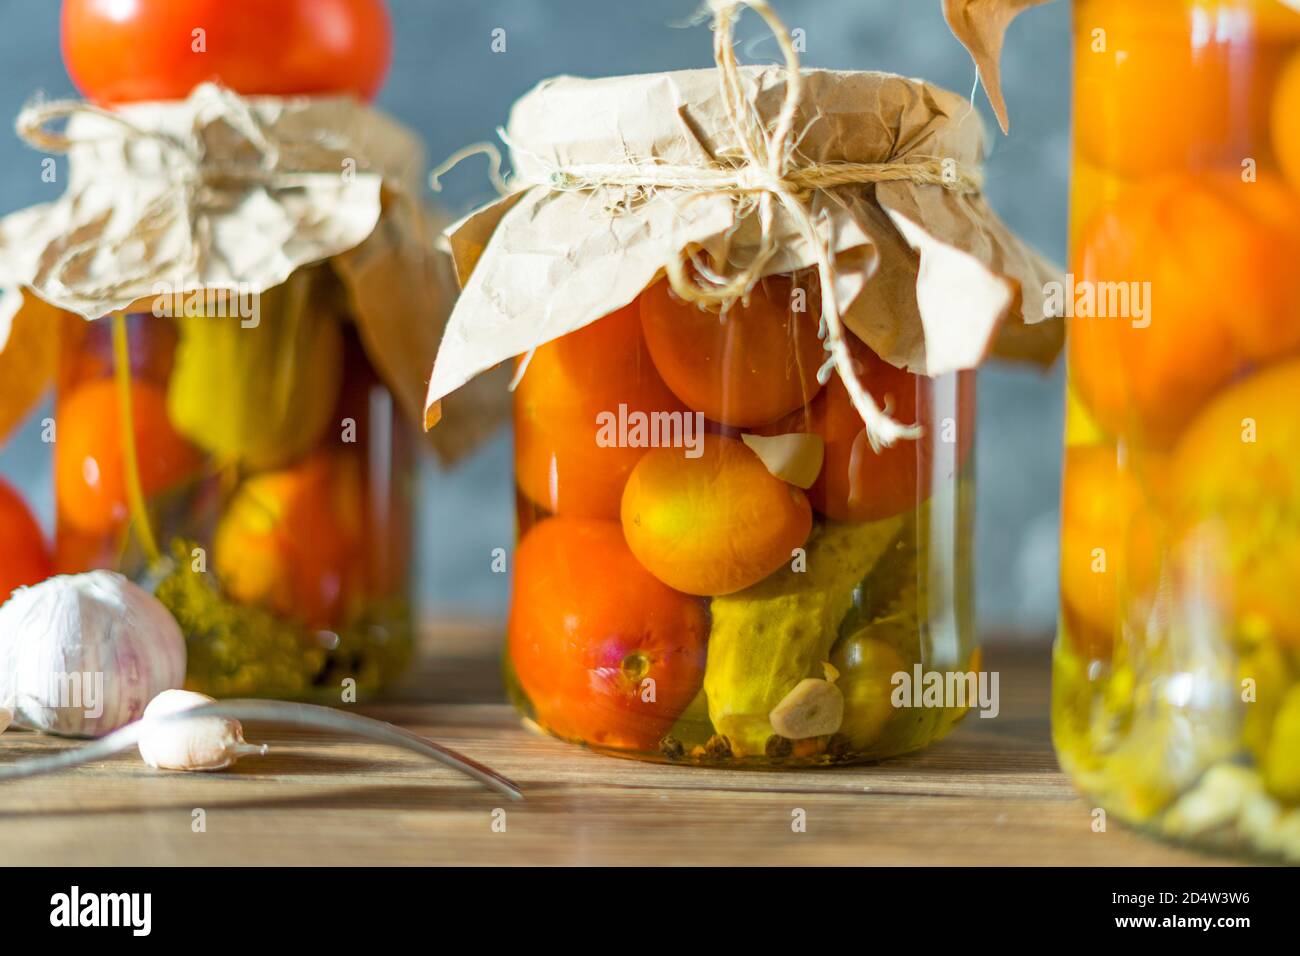 Homemade jars of pickled tomatoes and cucumbers on a rustic wooden background. Pickled and canned product. Fermented tomatoes on a dark background. Stock Photo